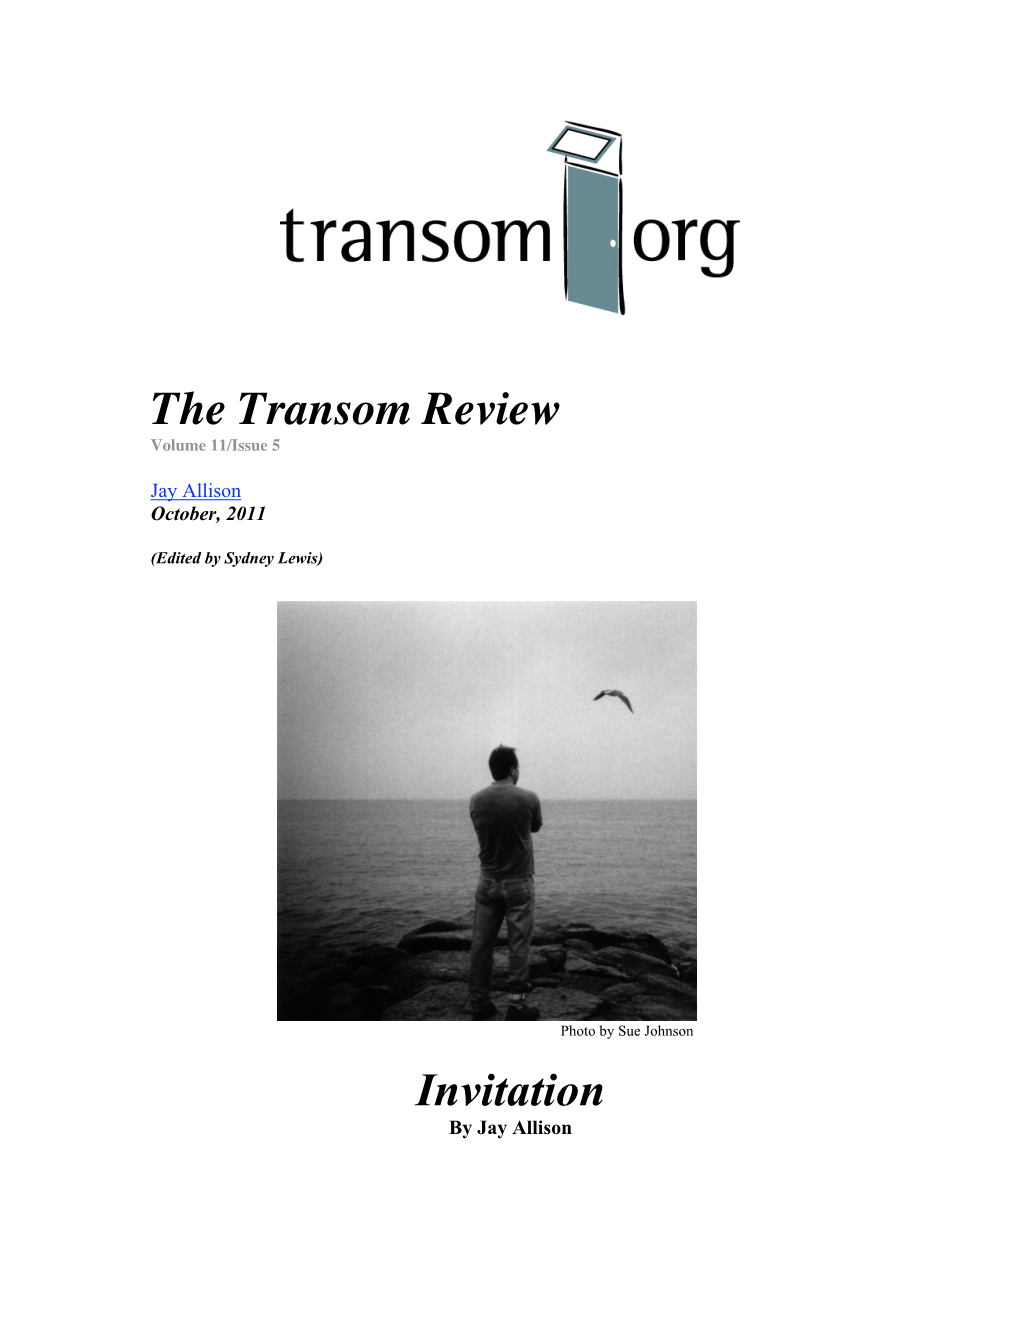 The Transom Review Invitation